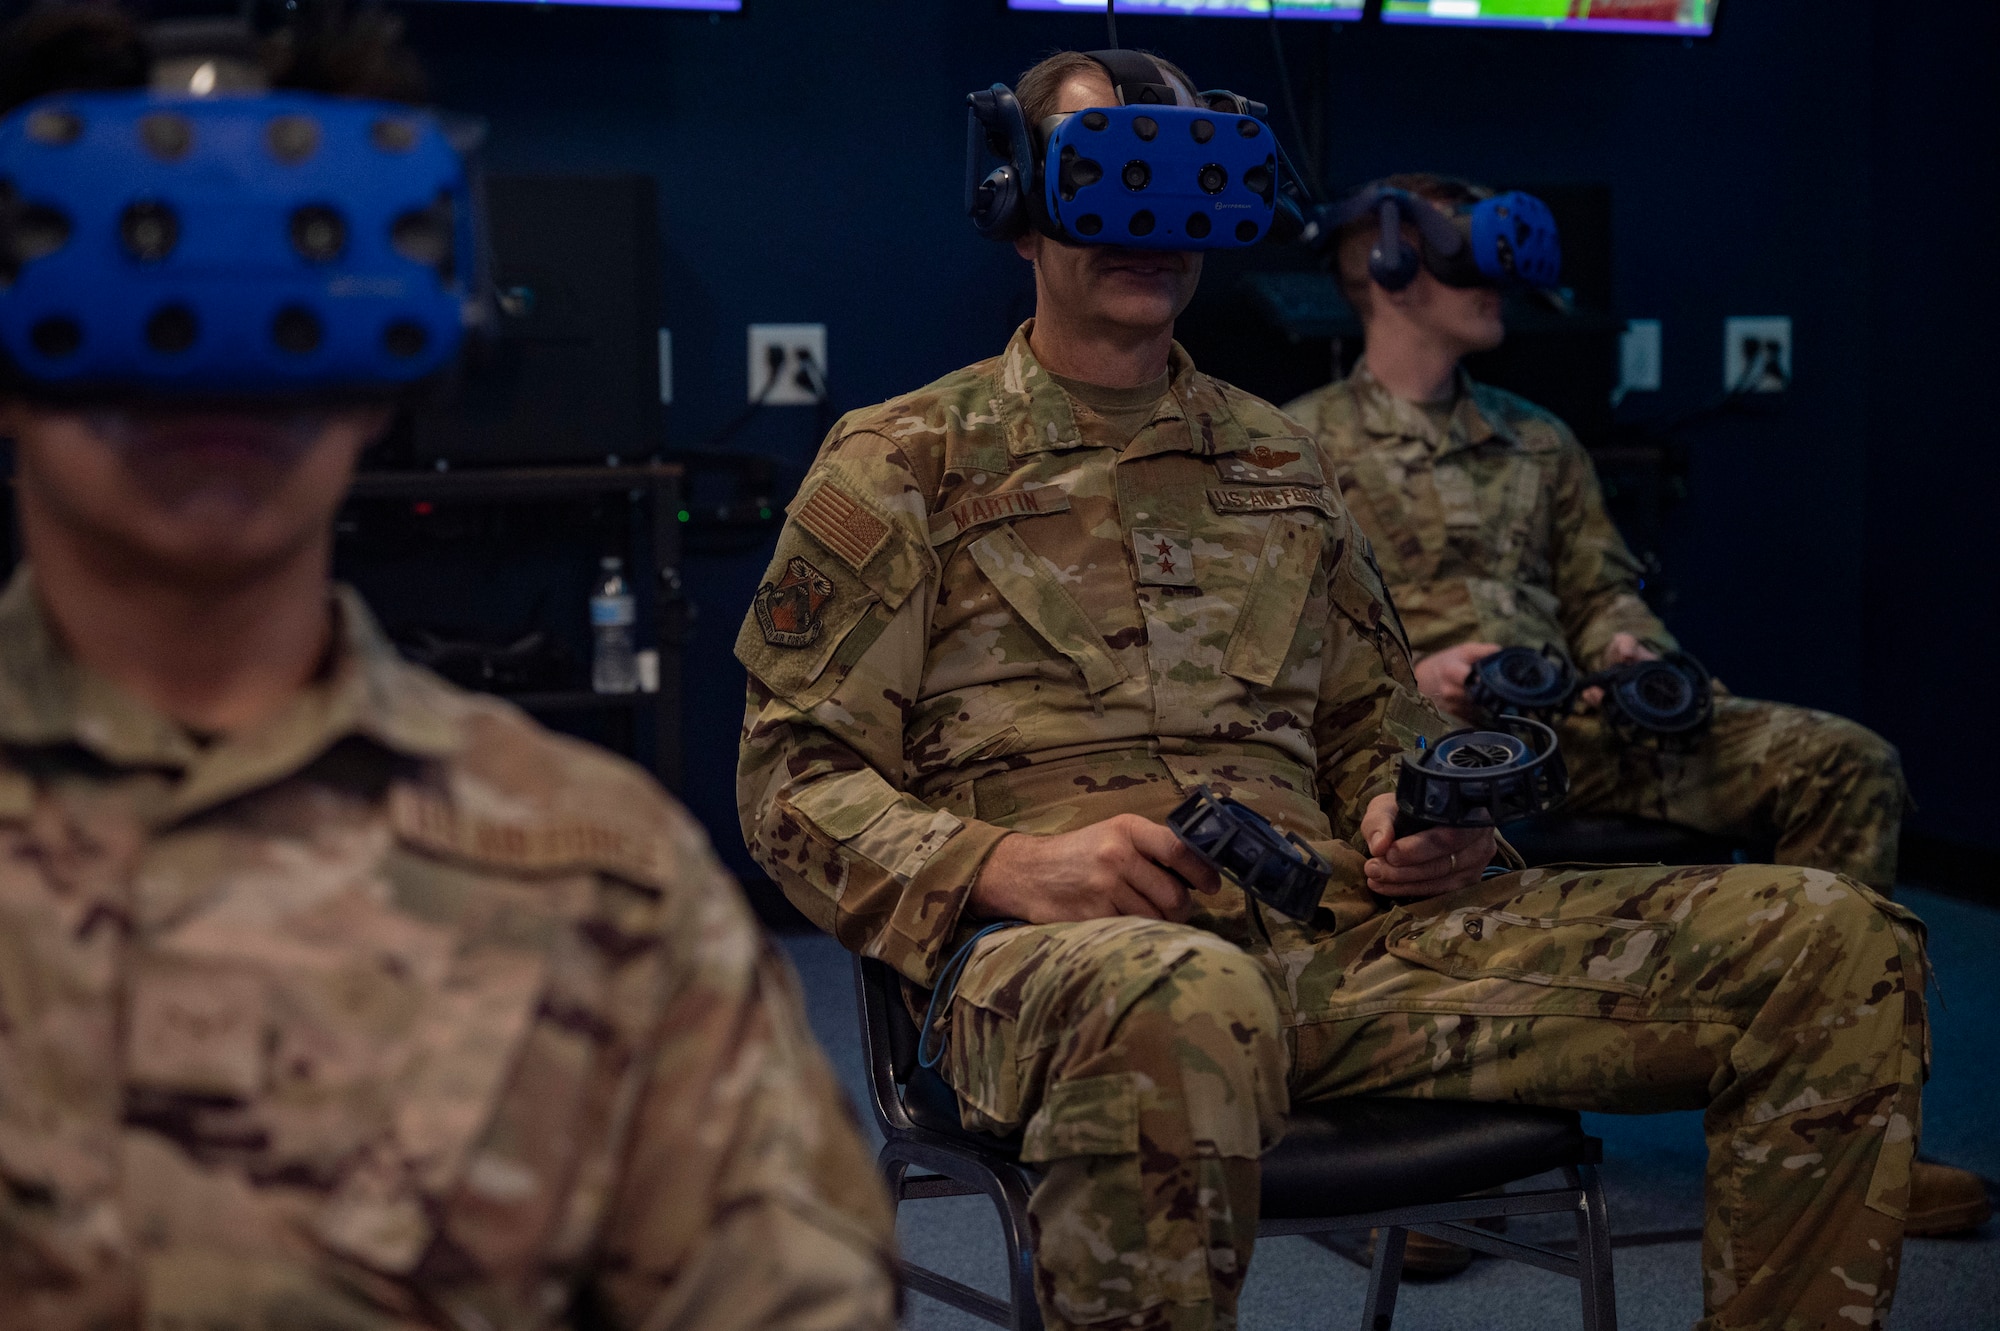 Maj. Gen. Corey Martin, 18th Air Force commander, looks through a virtual reality headset at Dyess Air Force Base, Texas, Aug. 25, 2022. The 317th Maintenance Group VR lab’s vision is to accelerate change in today’s C-130J Super Hercules maintenance training by utilizing 21st century technology, innovation through collaboration with other C-130J professionals, and transforming VR through the creative lens of the Airmen and their feedback. (U.S. Air Force photo by Senior Airman Josiah Brown)